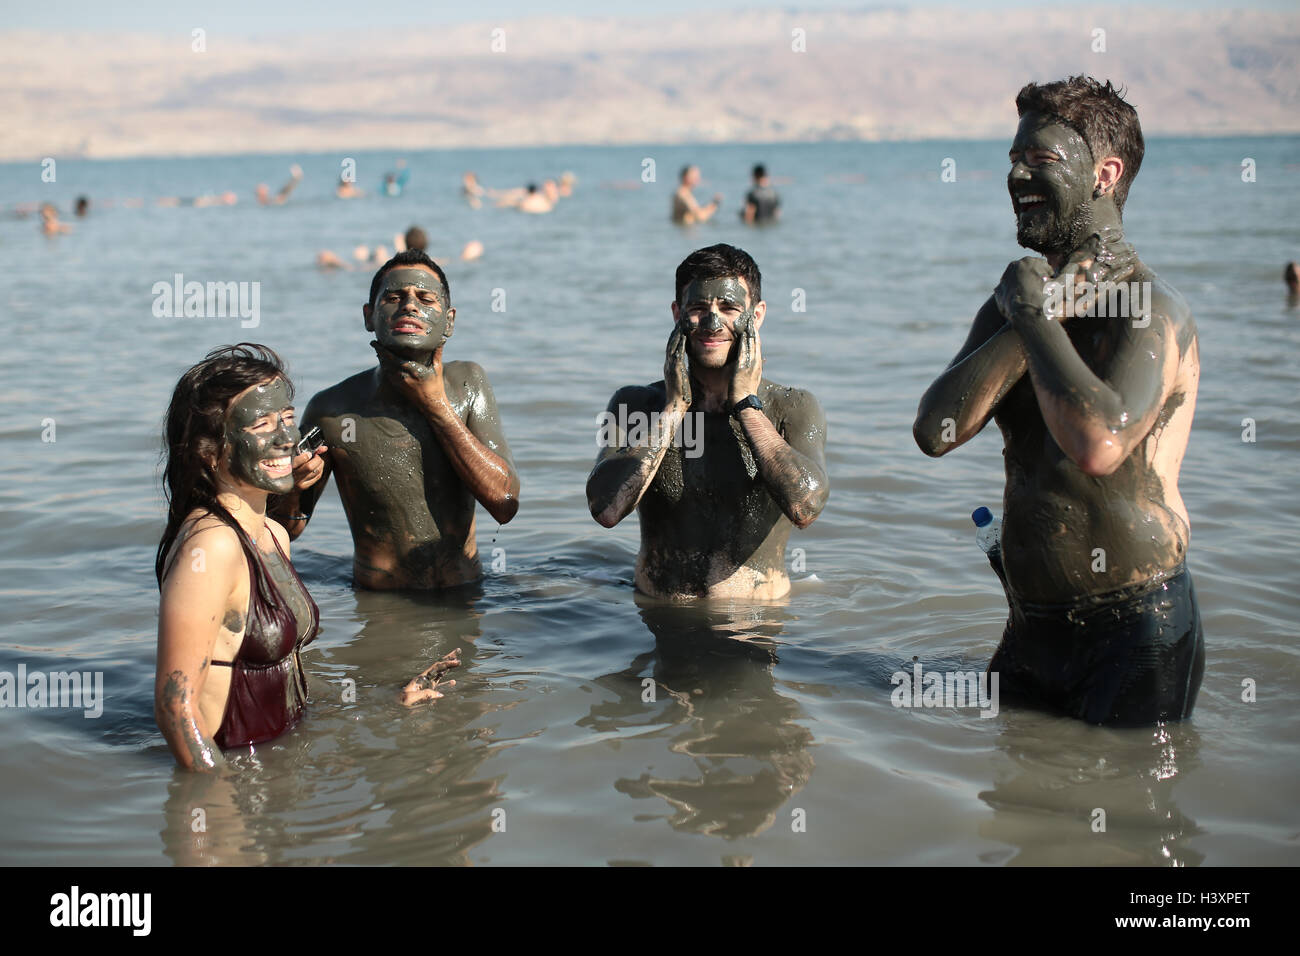 Bathers in the Dead Sea cover themselves in mud, which is reputed to have beneficial effects for the skin. From a series of phot Stock Photo